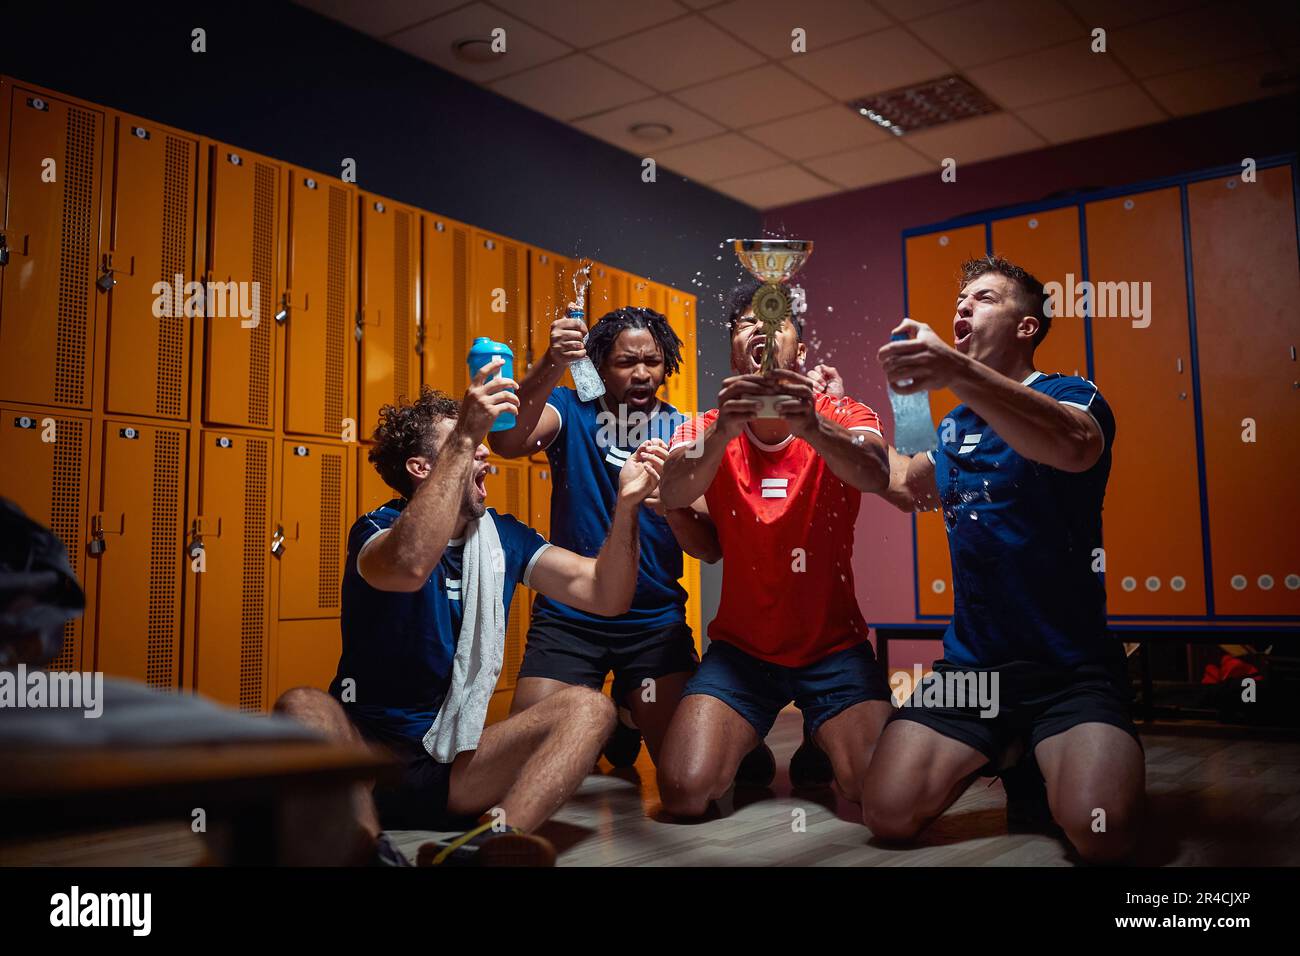 Group of young football players celebrating golden trophy together in the dressing room. Splashing water and shouting, feeling joyful. Stock Photo